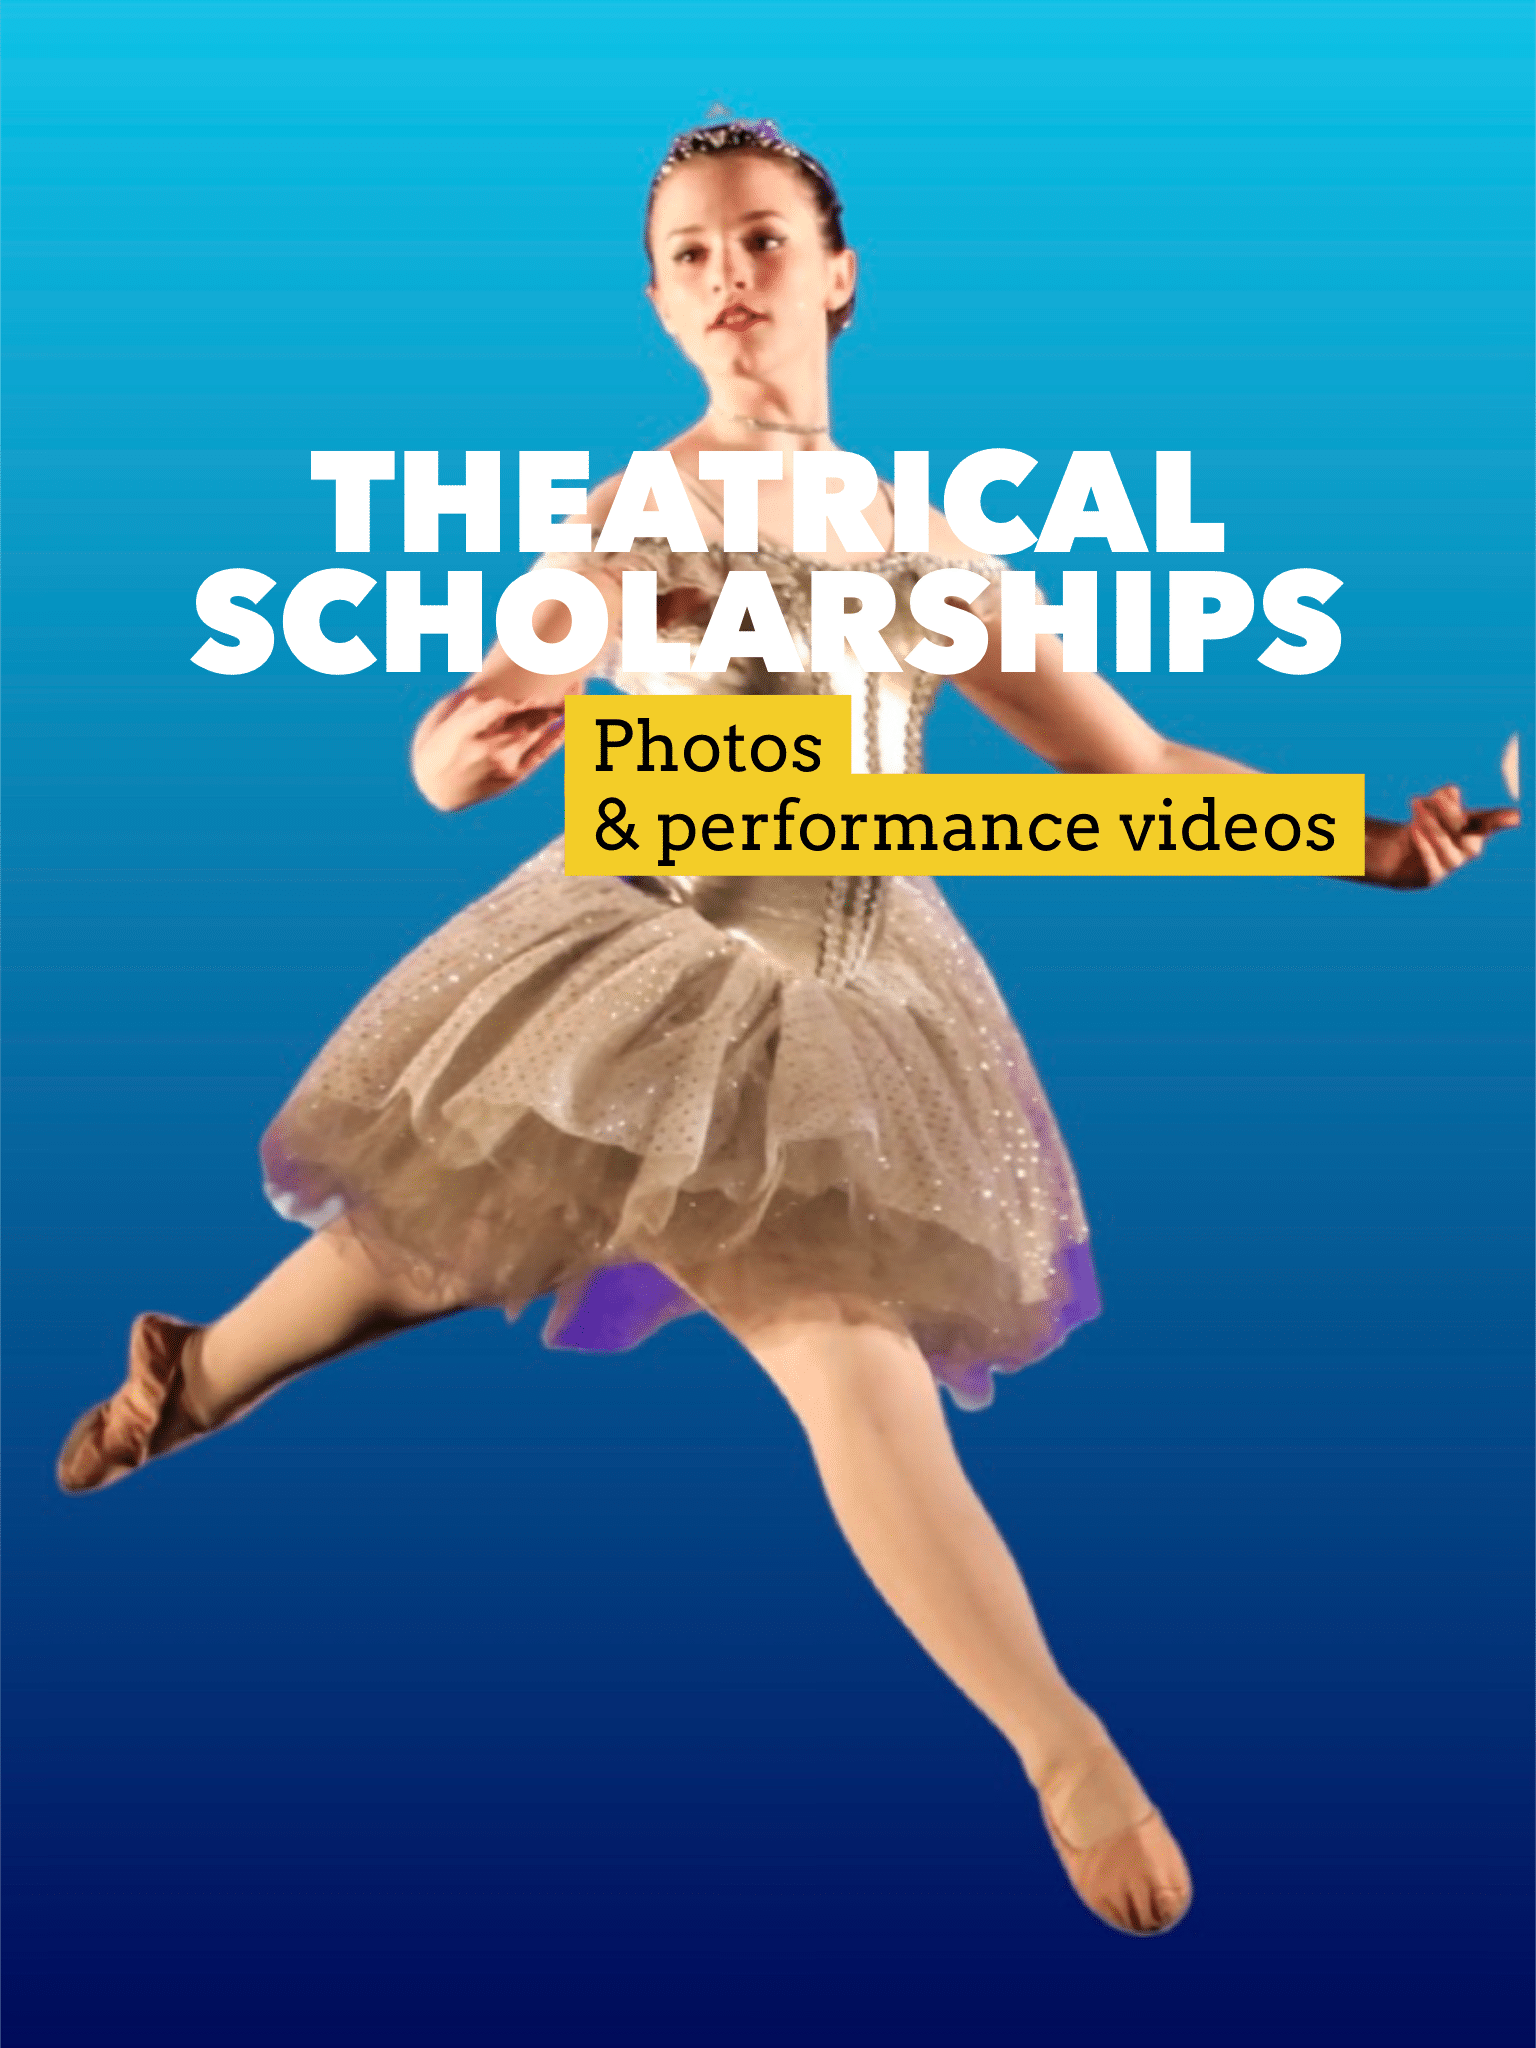 Theatrical Scholarships Photos & Performance videos